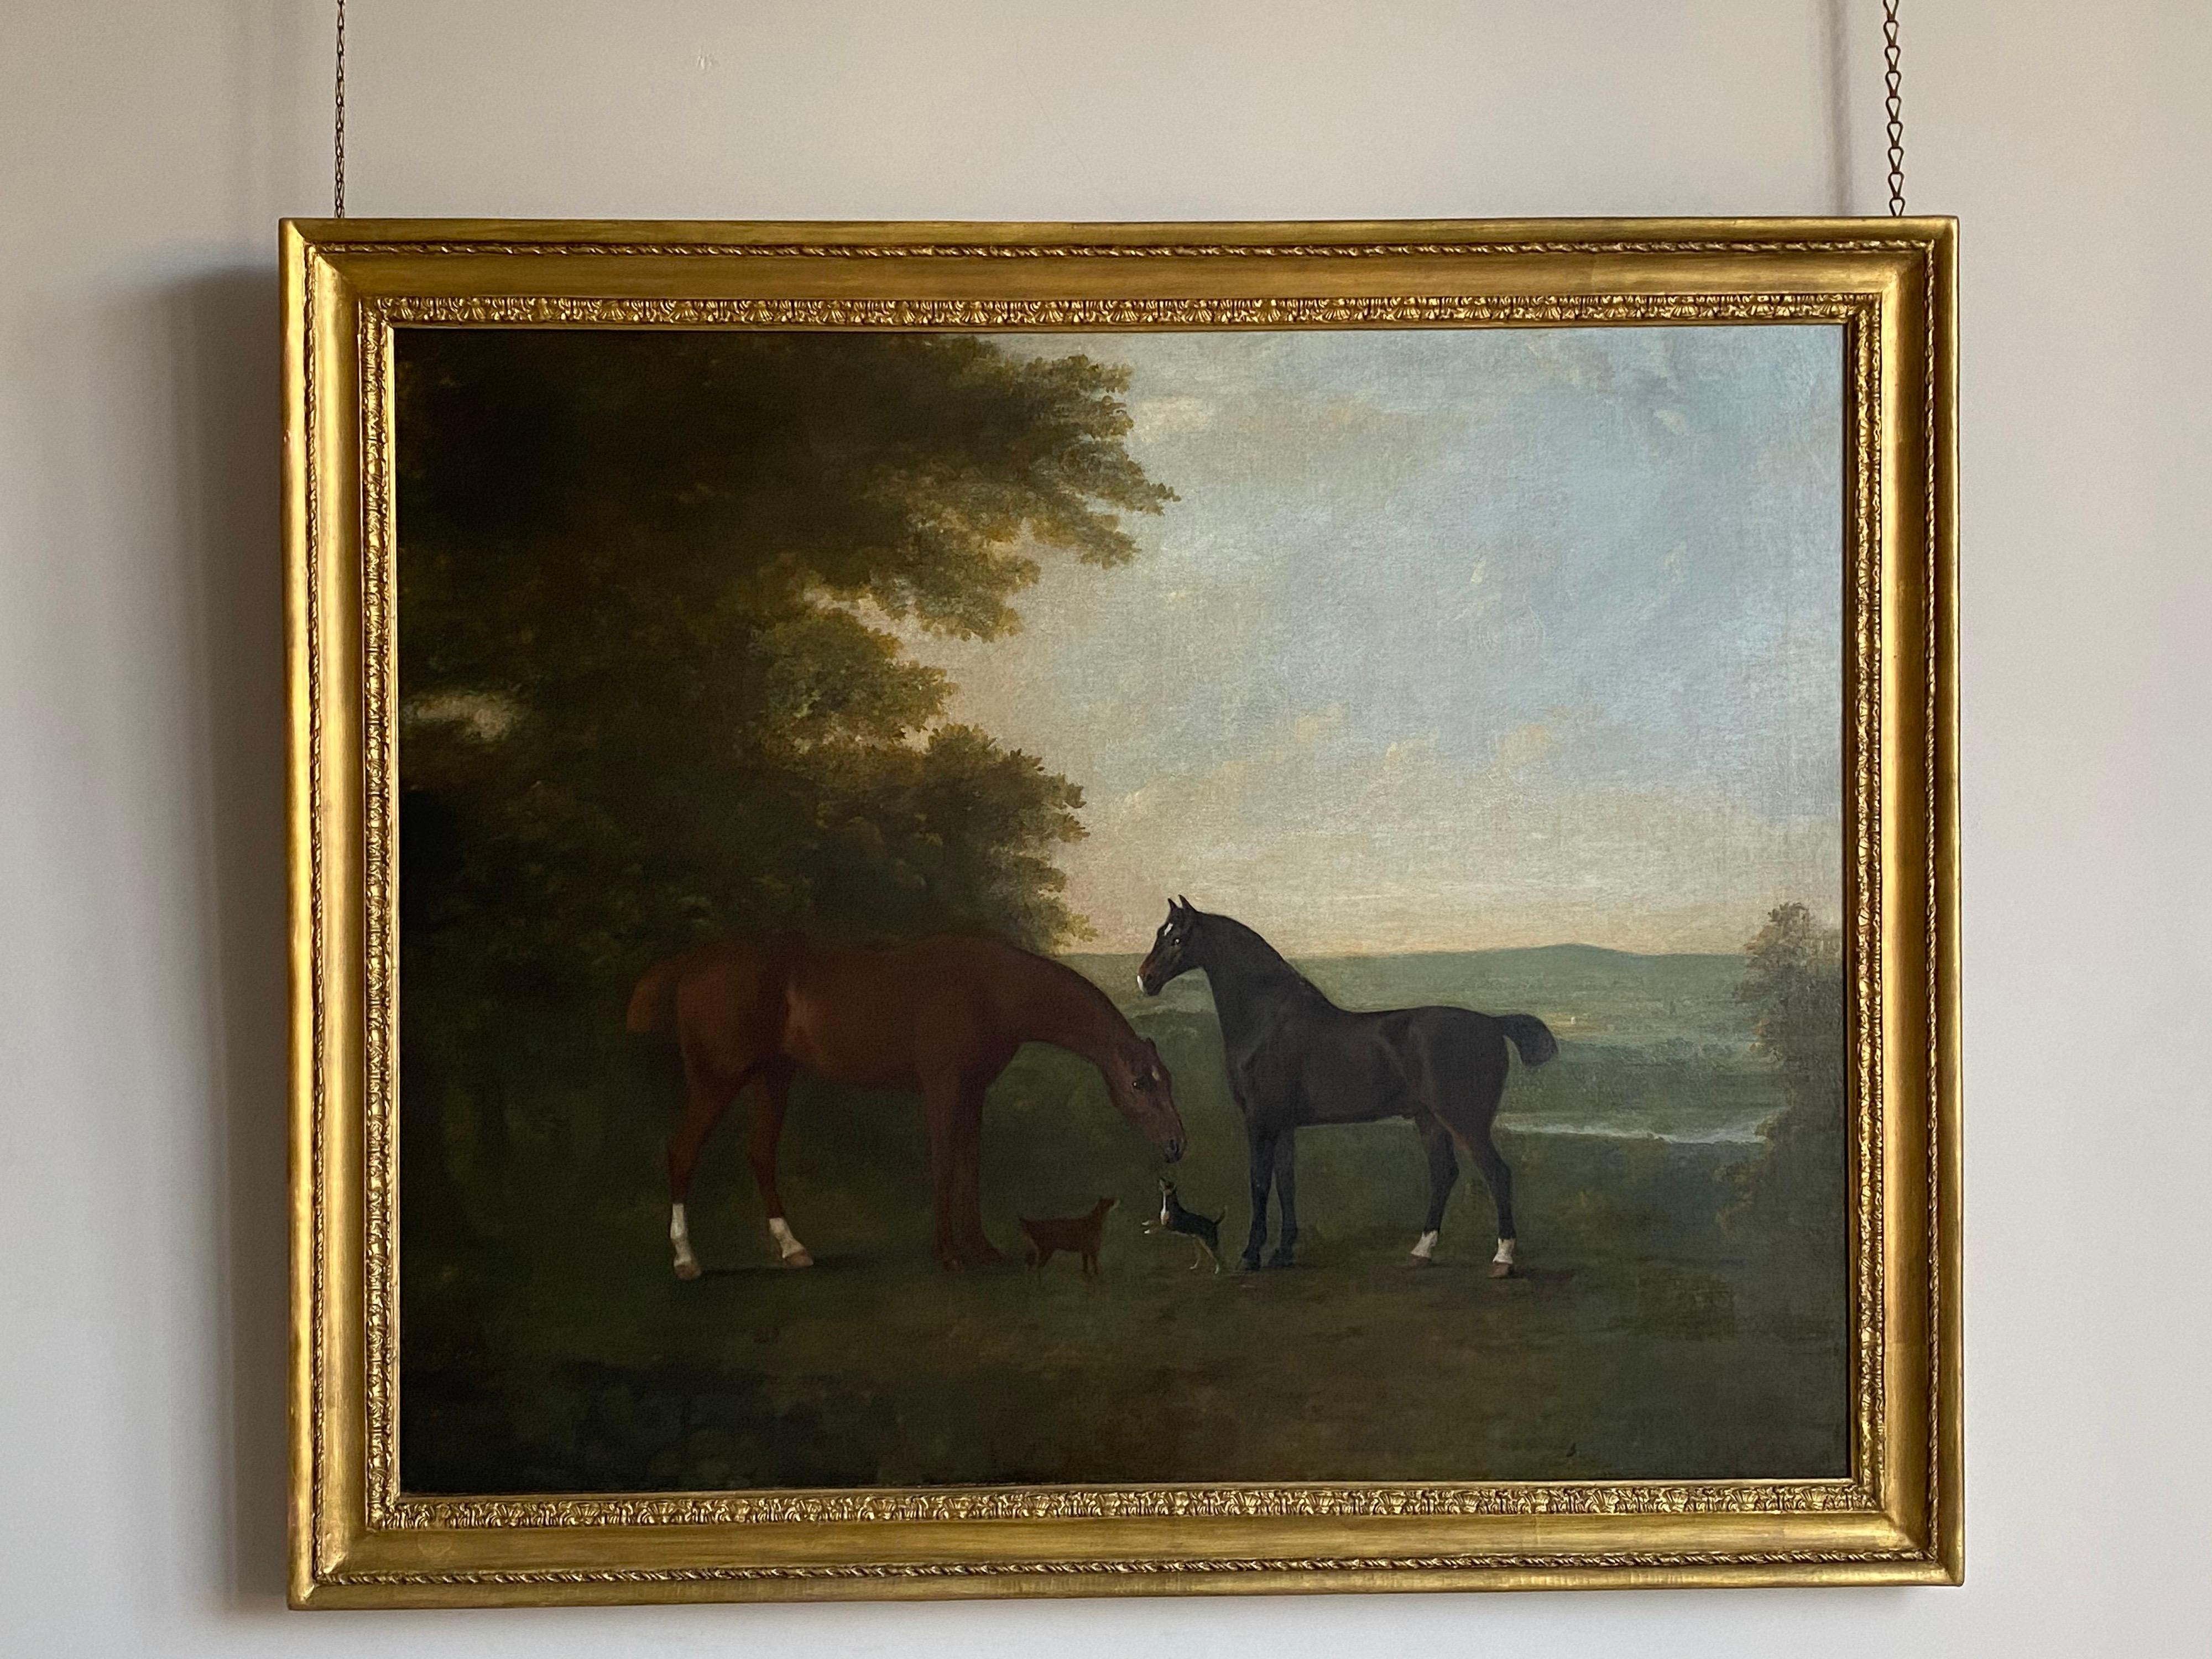 Horses with accompanying dogs in an extensive English landscape, 18th century - Painting by John Boultbee